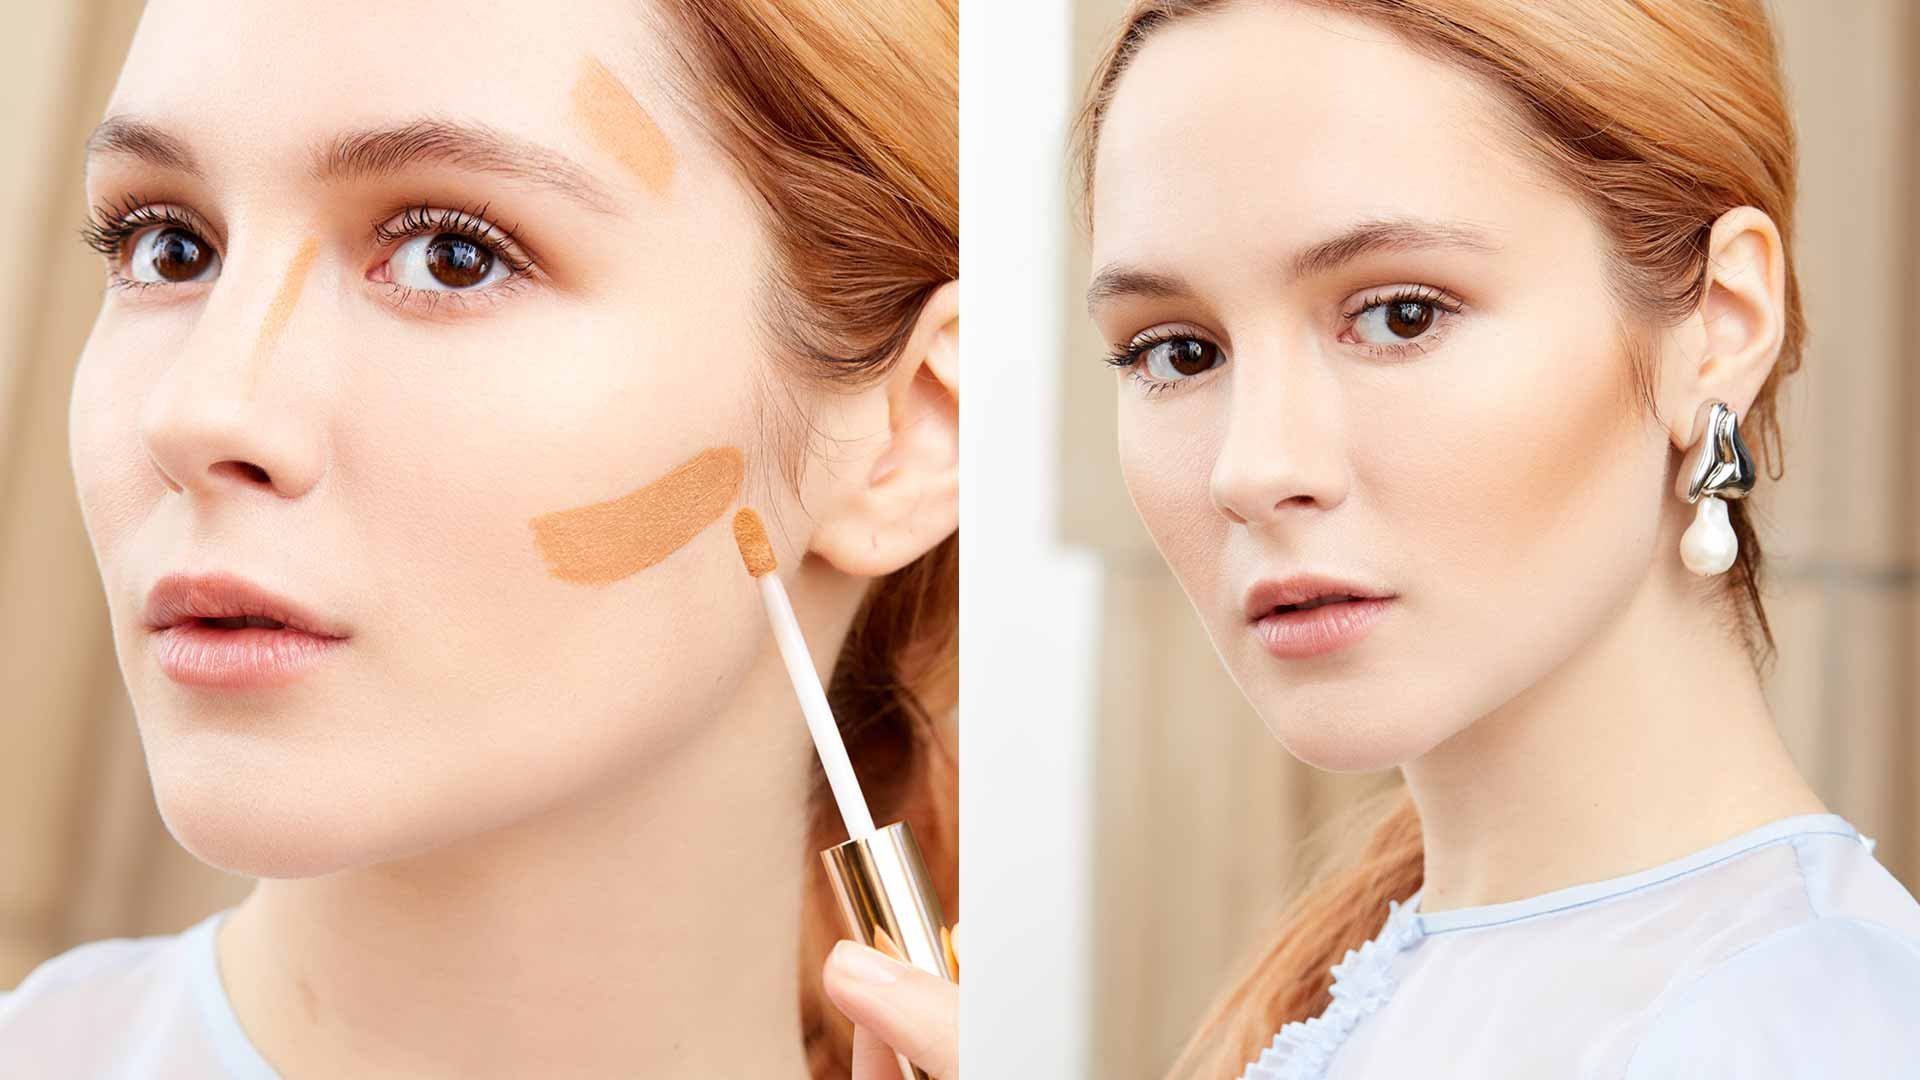 https://www.lorealparisusa.com/-/media/project/loreal/brand-sites/oap/americas/us/beauty-magazine/2021/april/4-21/contouring-mistakes-to-avoid/contouring-mistakes-hero-new-bmag.jpg